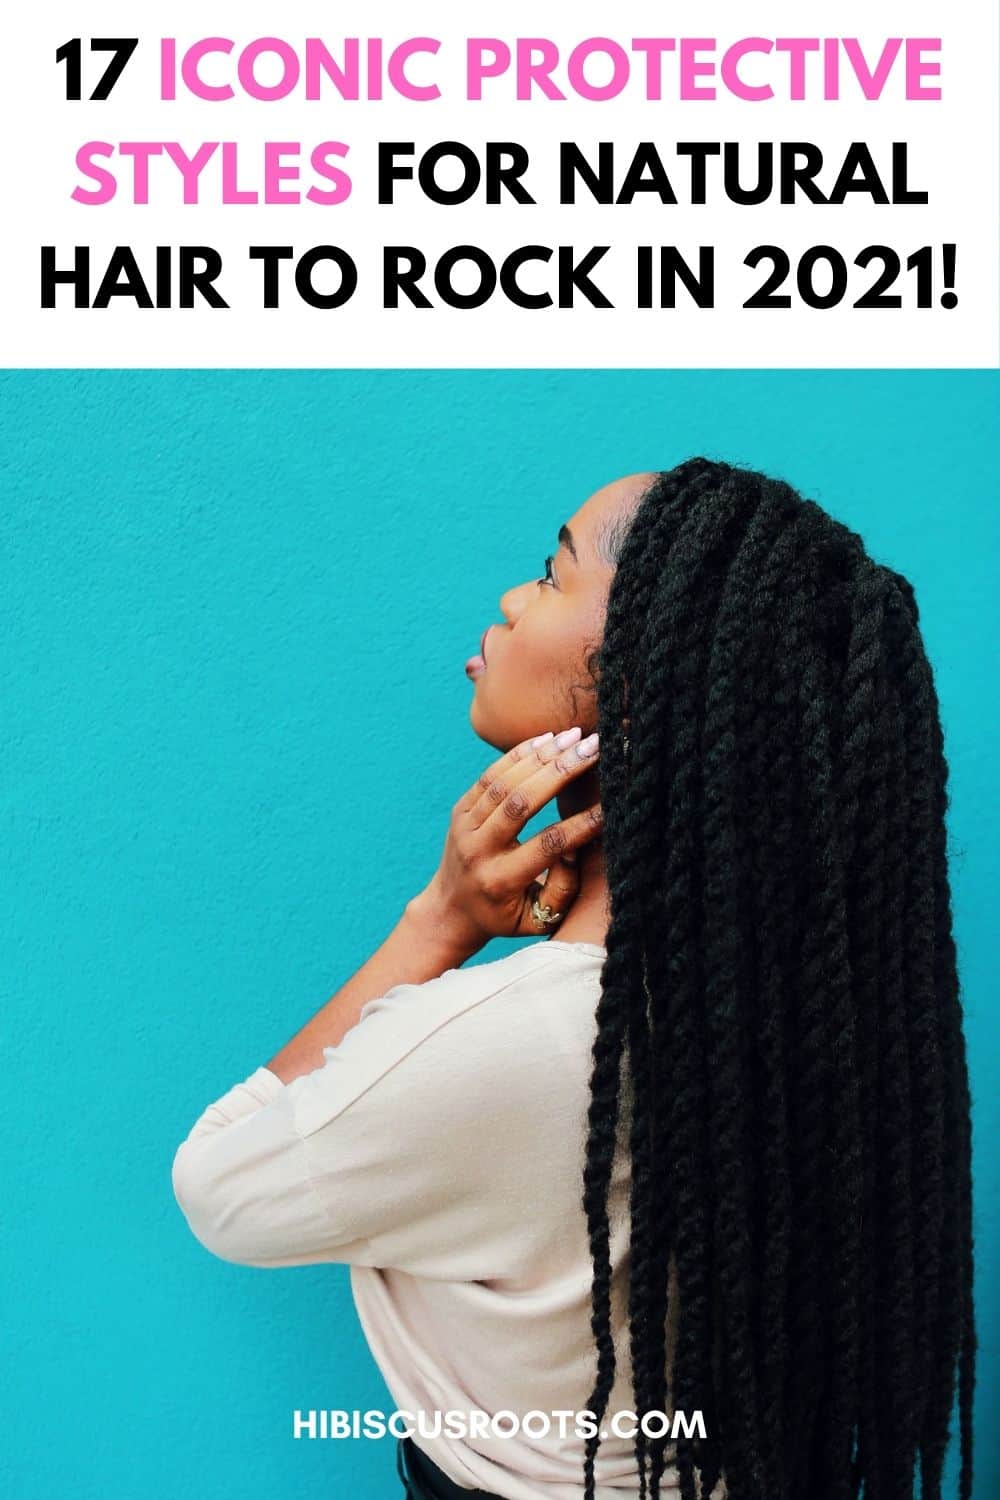 17 Iconic Protective Styles for Natural Hair in 2022!